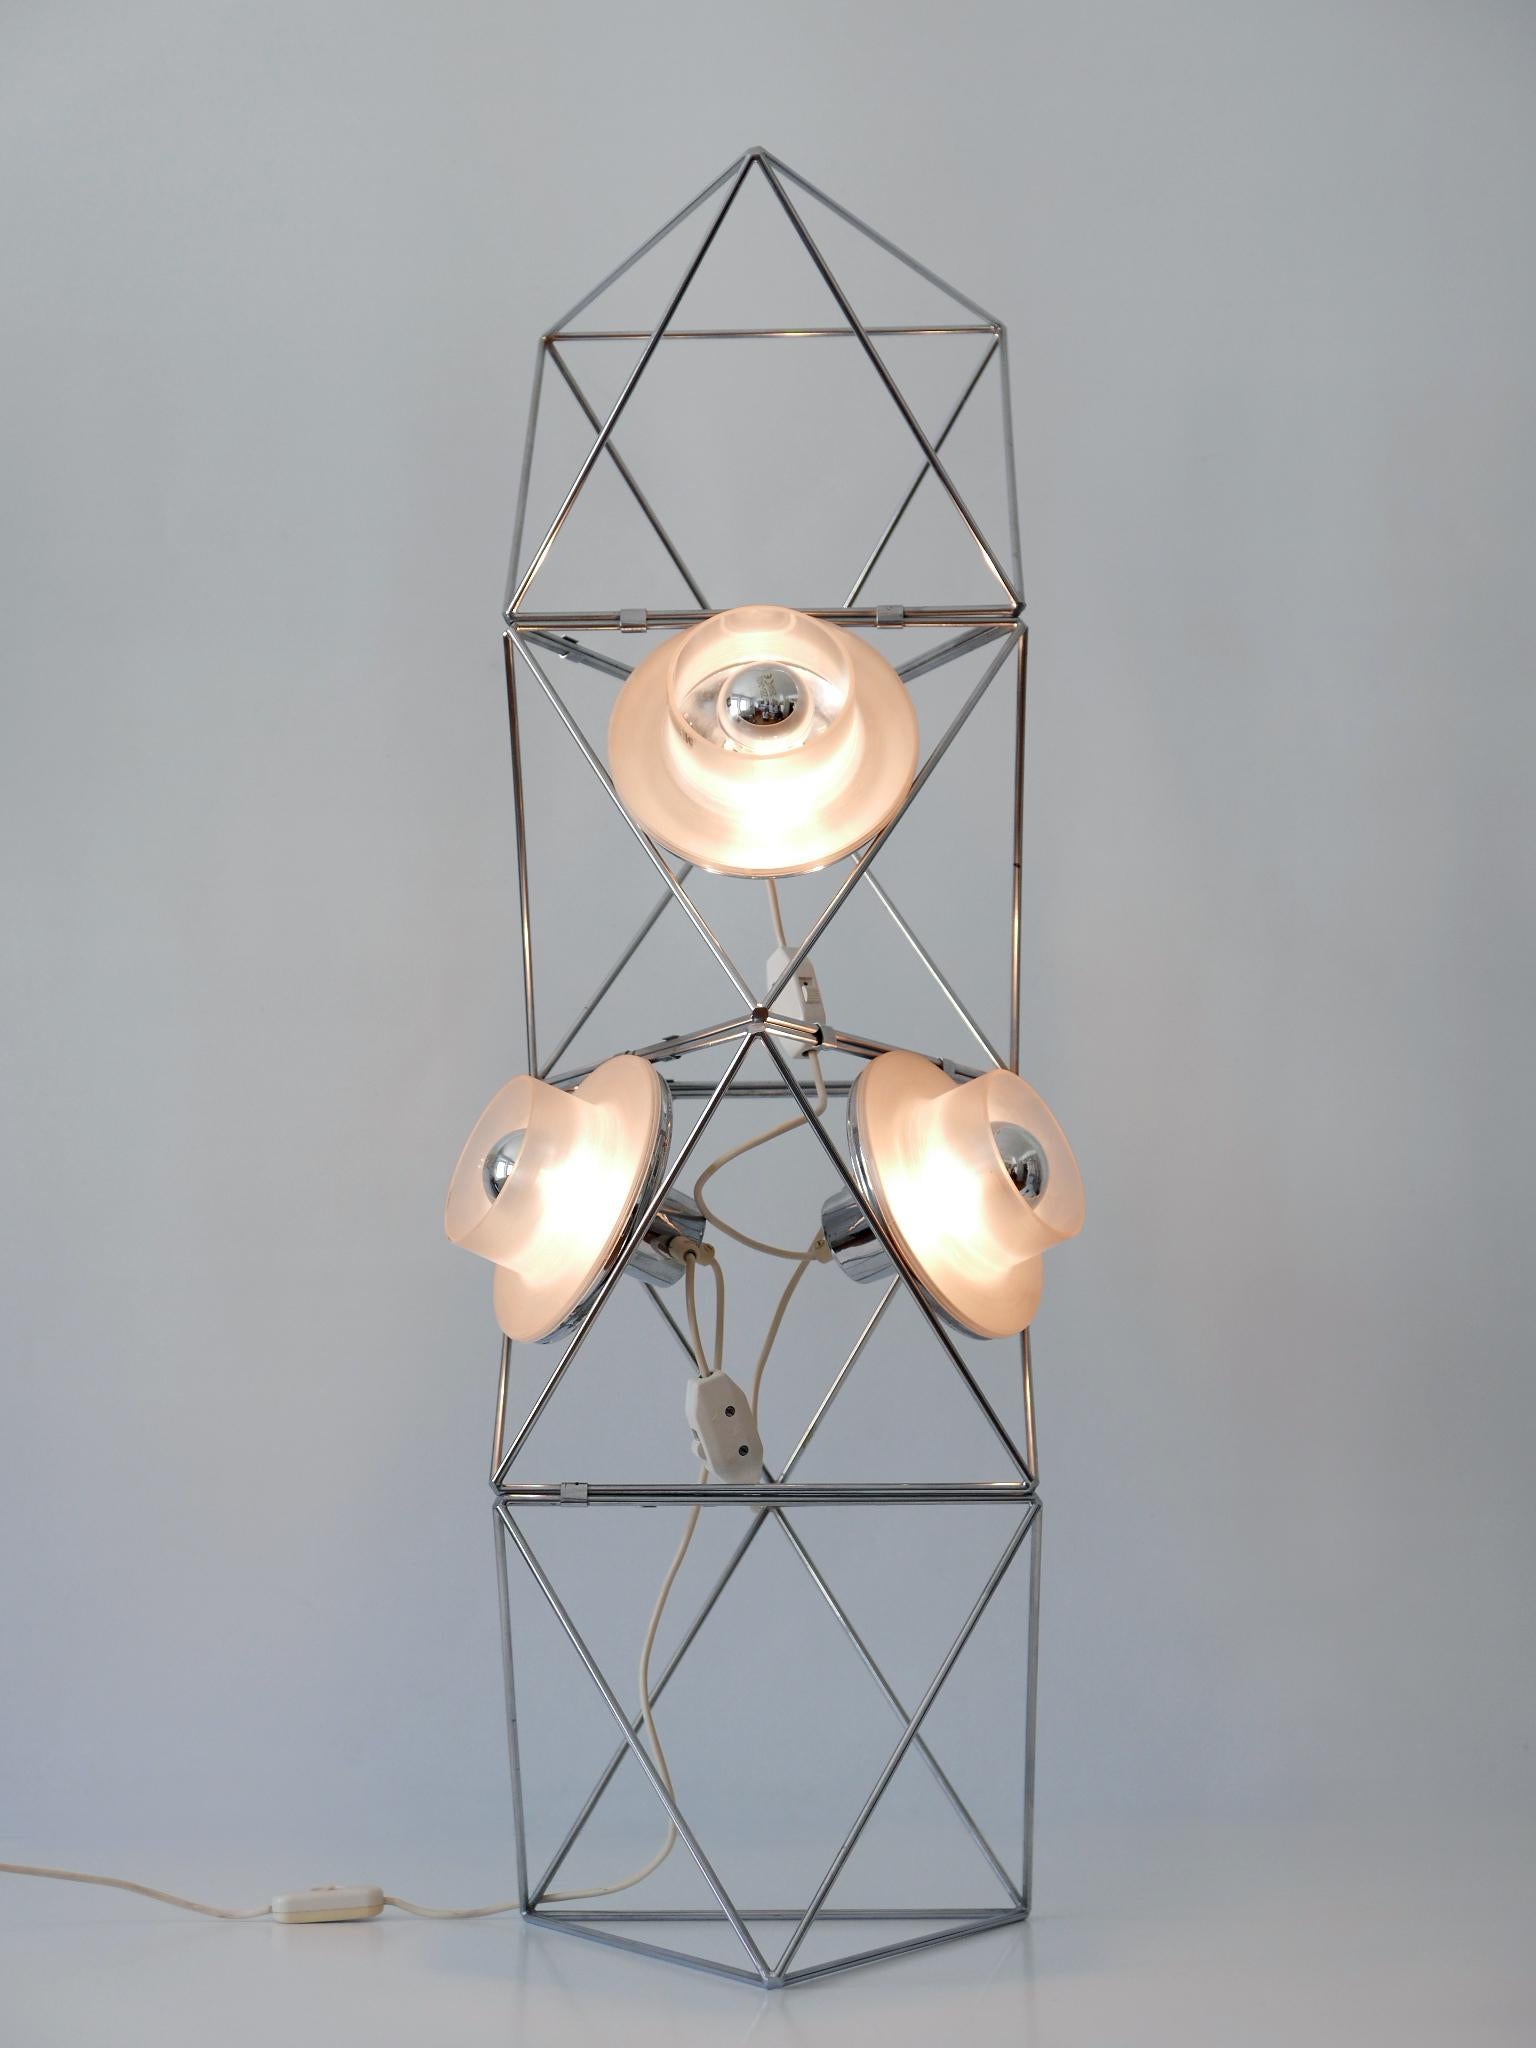 Sculptural Mid Century Modern 'Poliedra' floor lamp. The floor lamp consists of four modular elements that are characterized in geometry as polyhedra and can be combined into different shapes due to the metal clips which hold the elements.